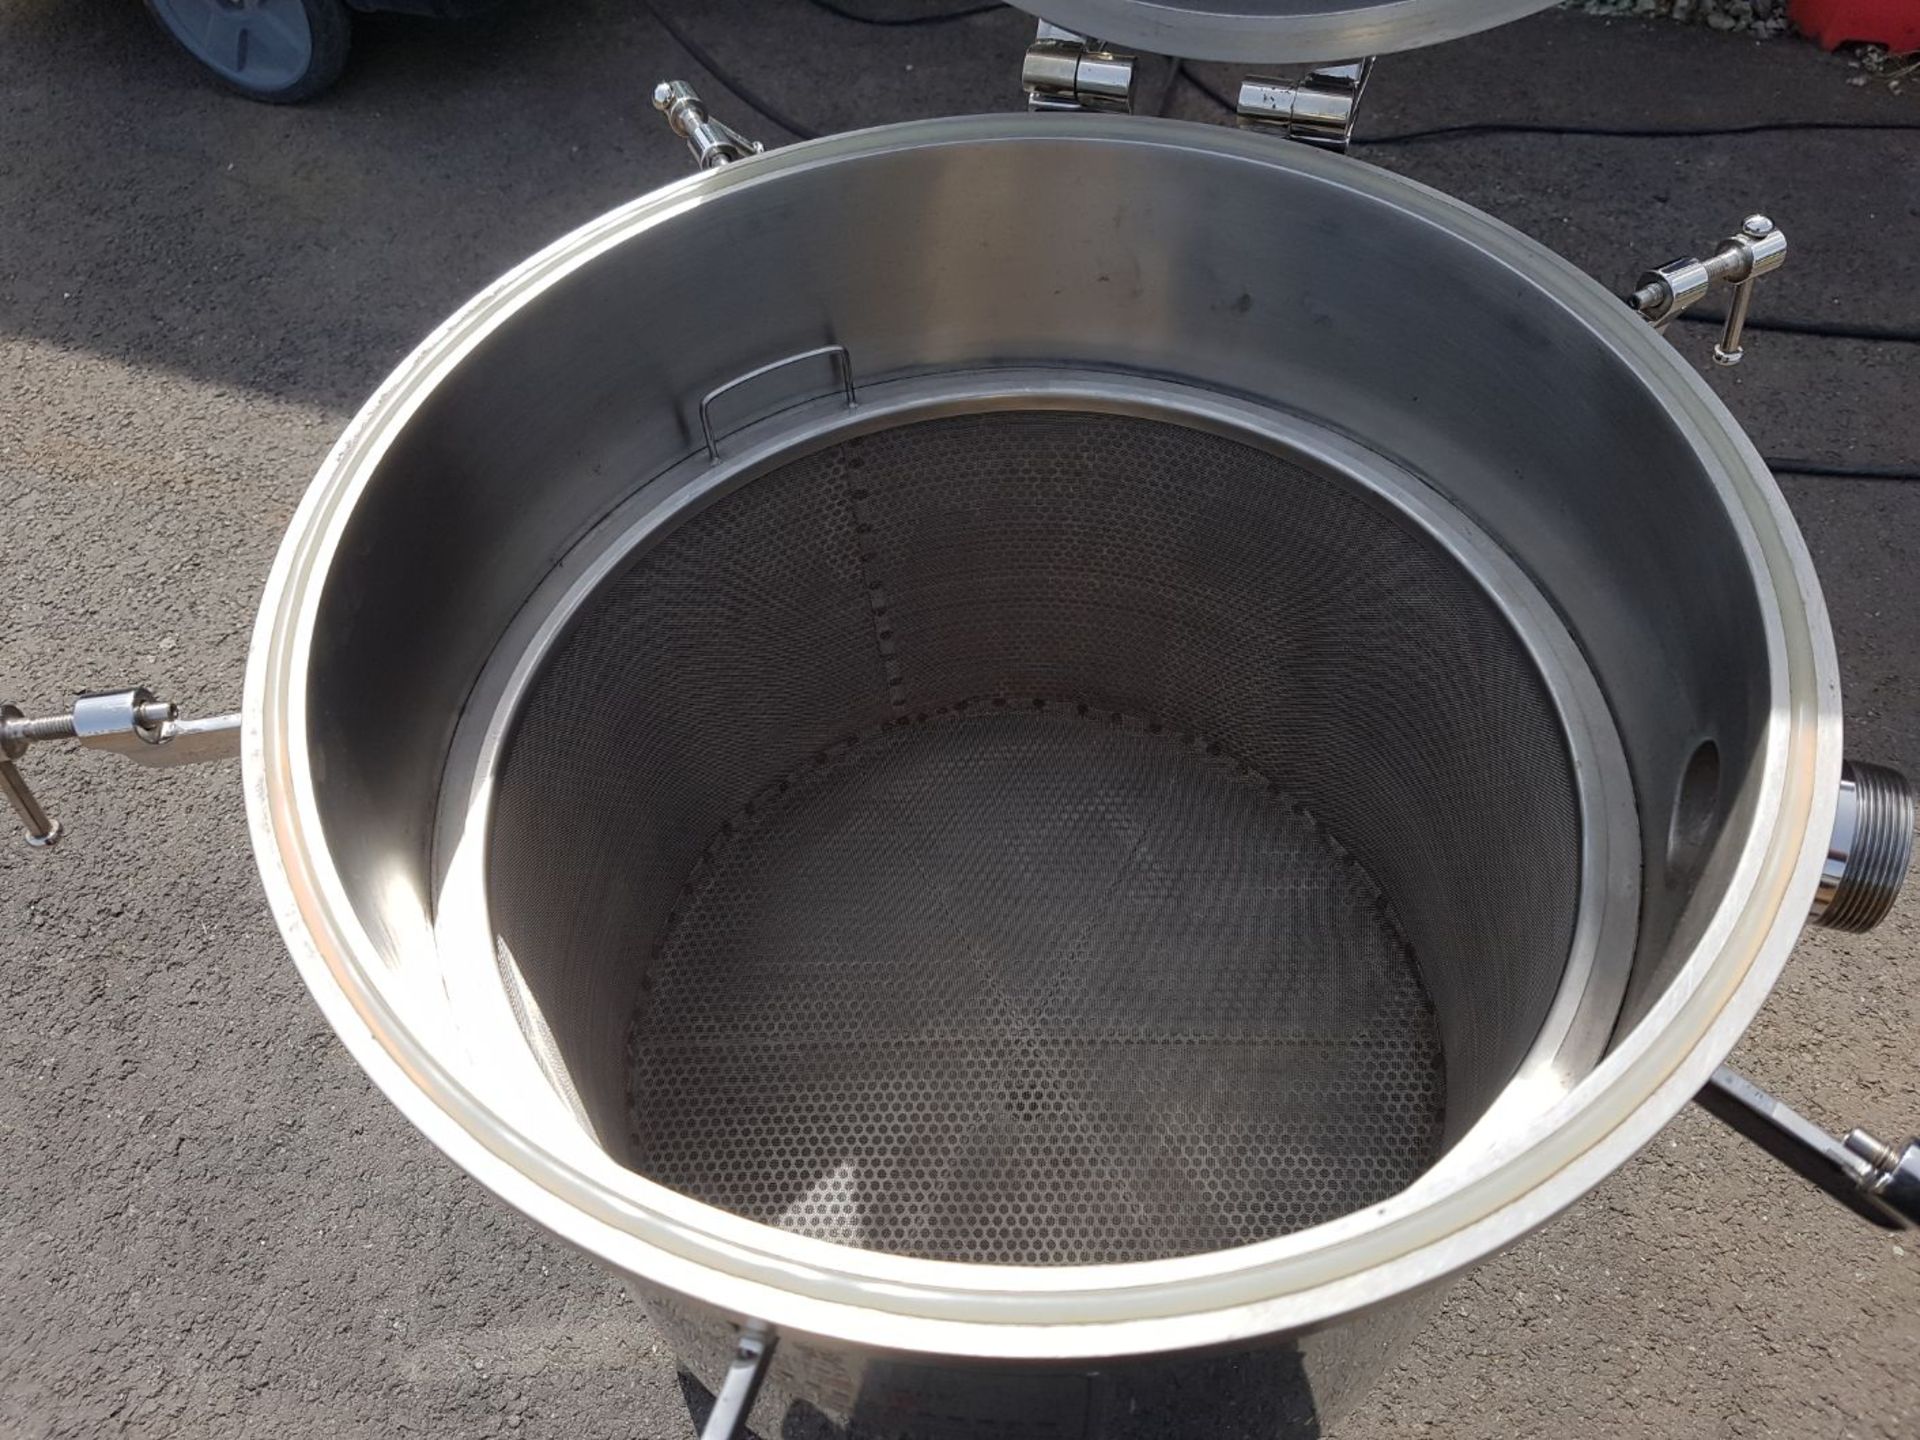 1 x brand new resin impregnation stainless steel tank vacuum tank with basket filter support - Image 4 of 7